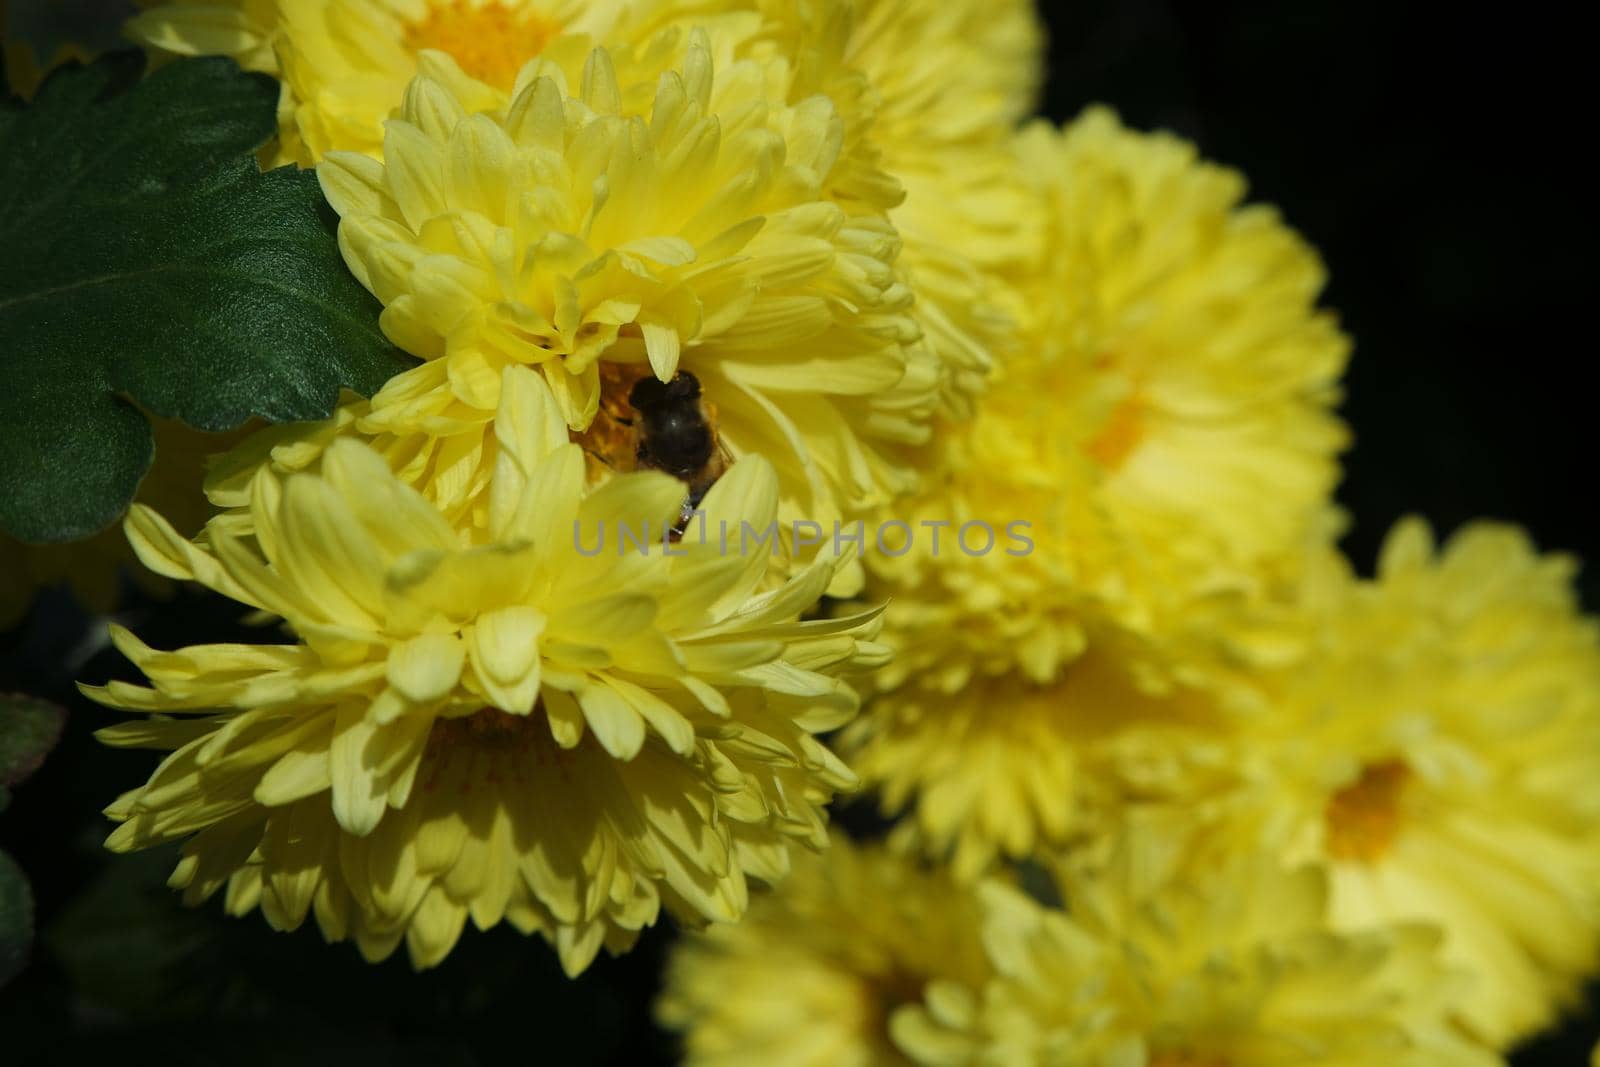 Closeup view of lovely yellow flower against a green leaves blurred background. This flower is found in South Korea.